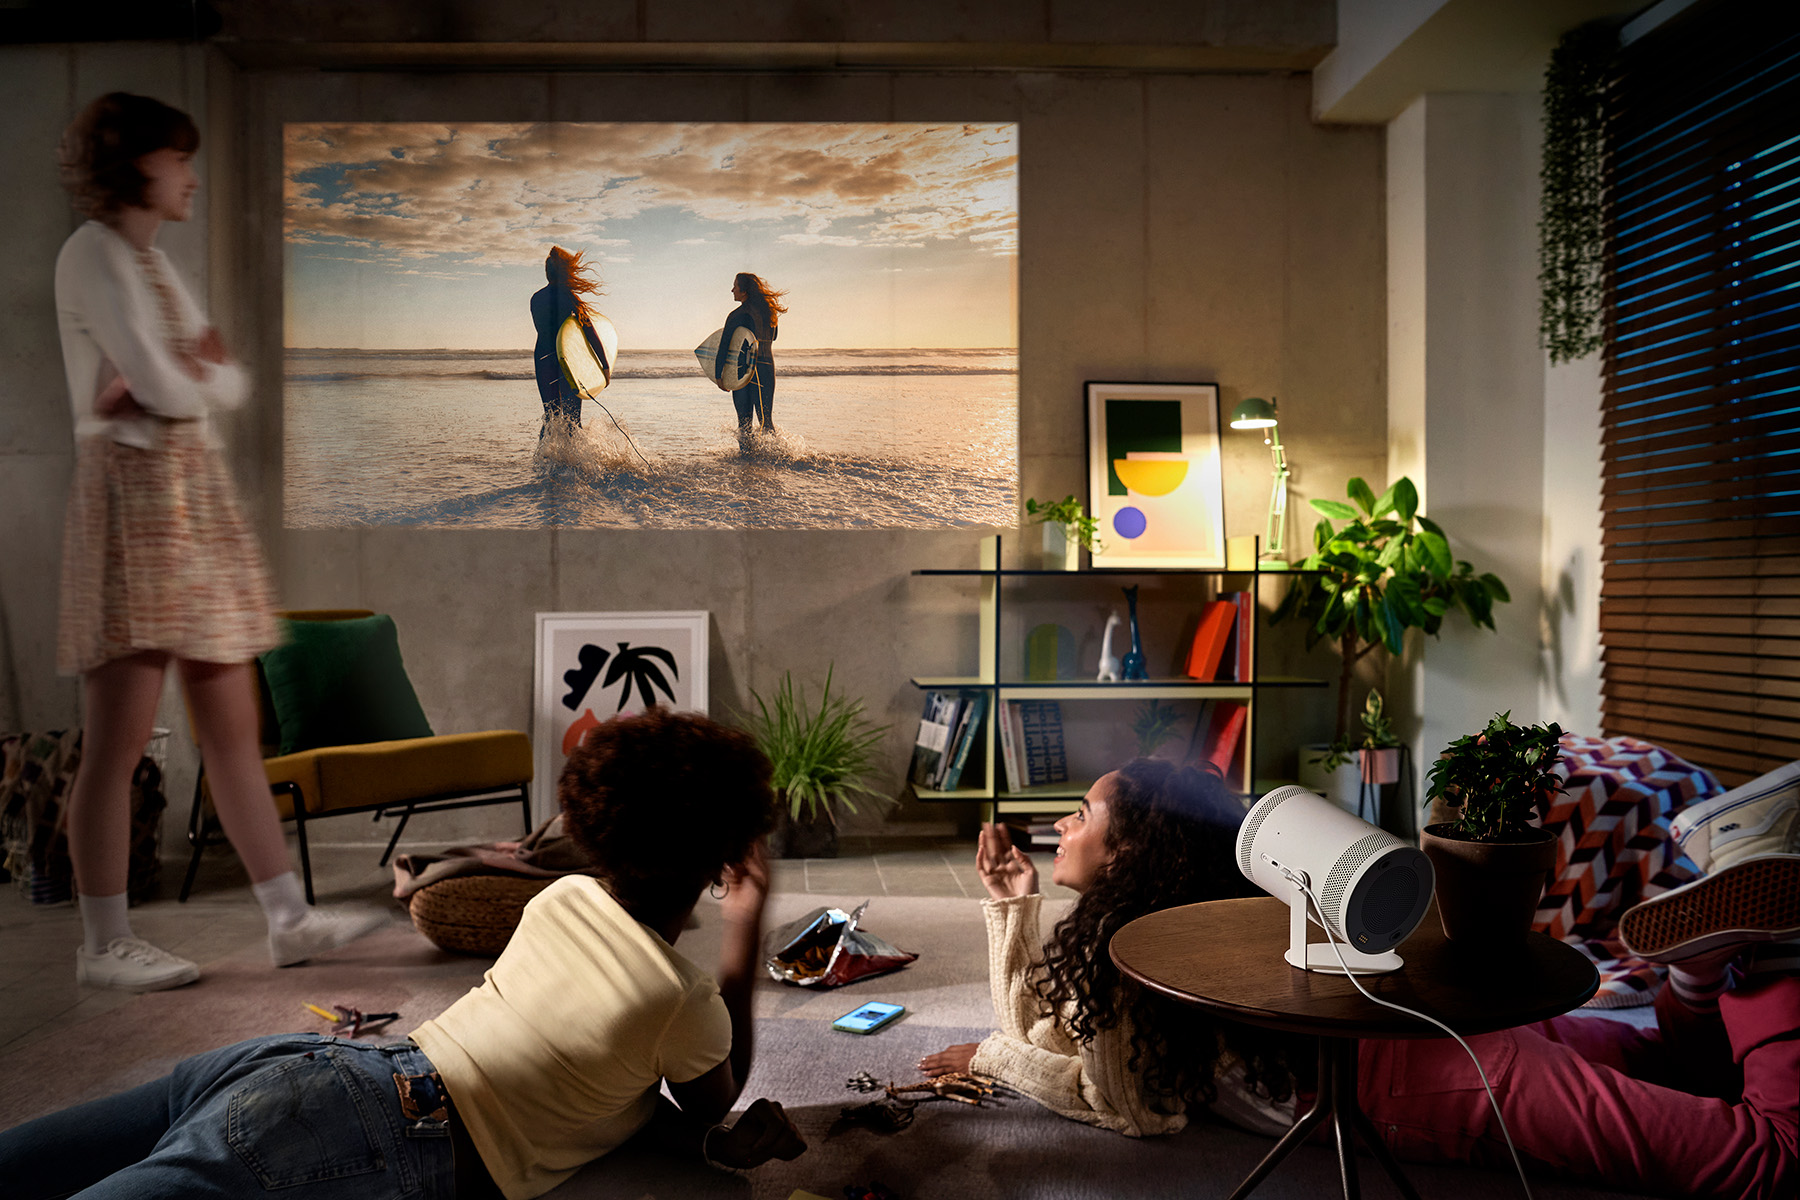 Samsung Freestyle projector